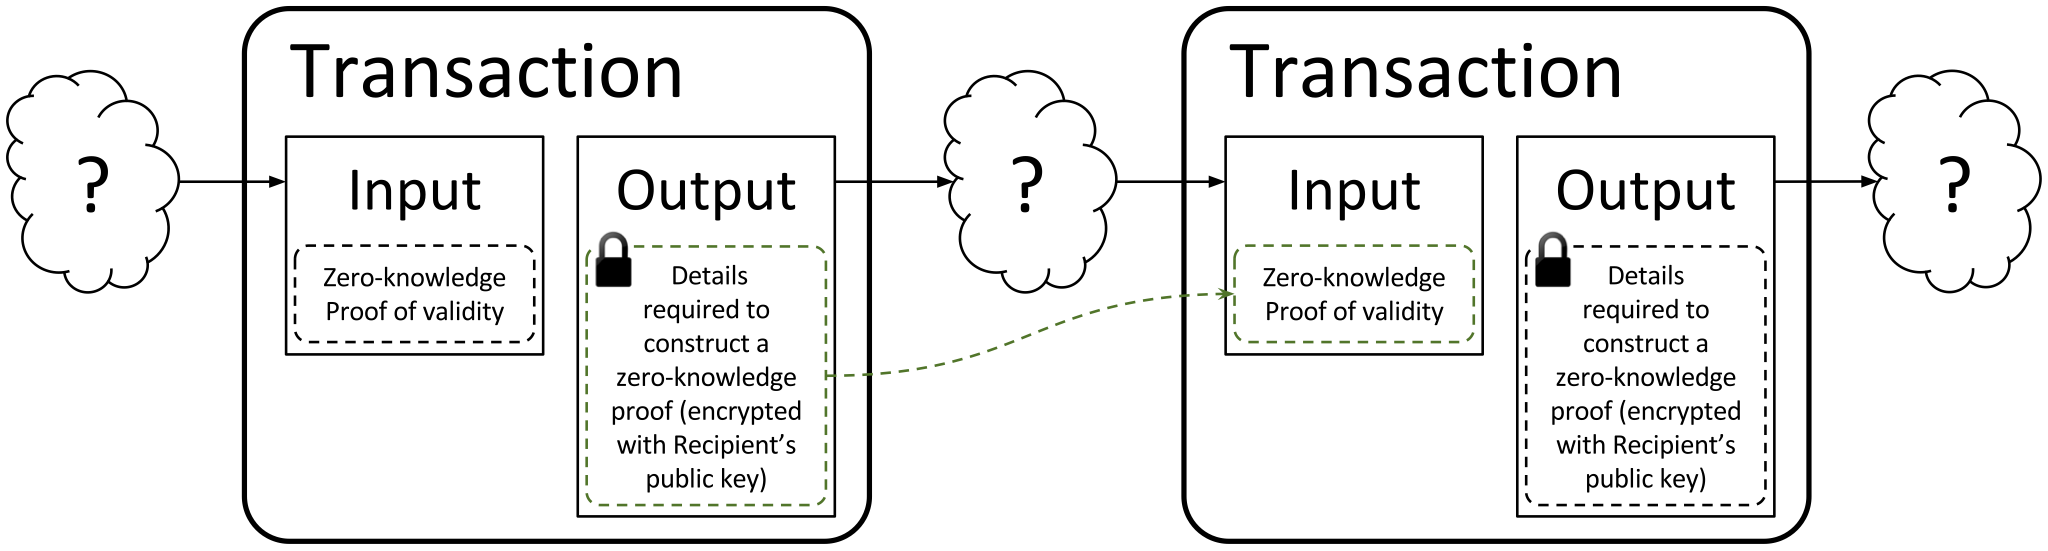 A high-level skeleton diagram of a zero-knowledge proof transaction